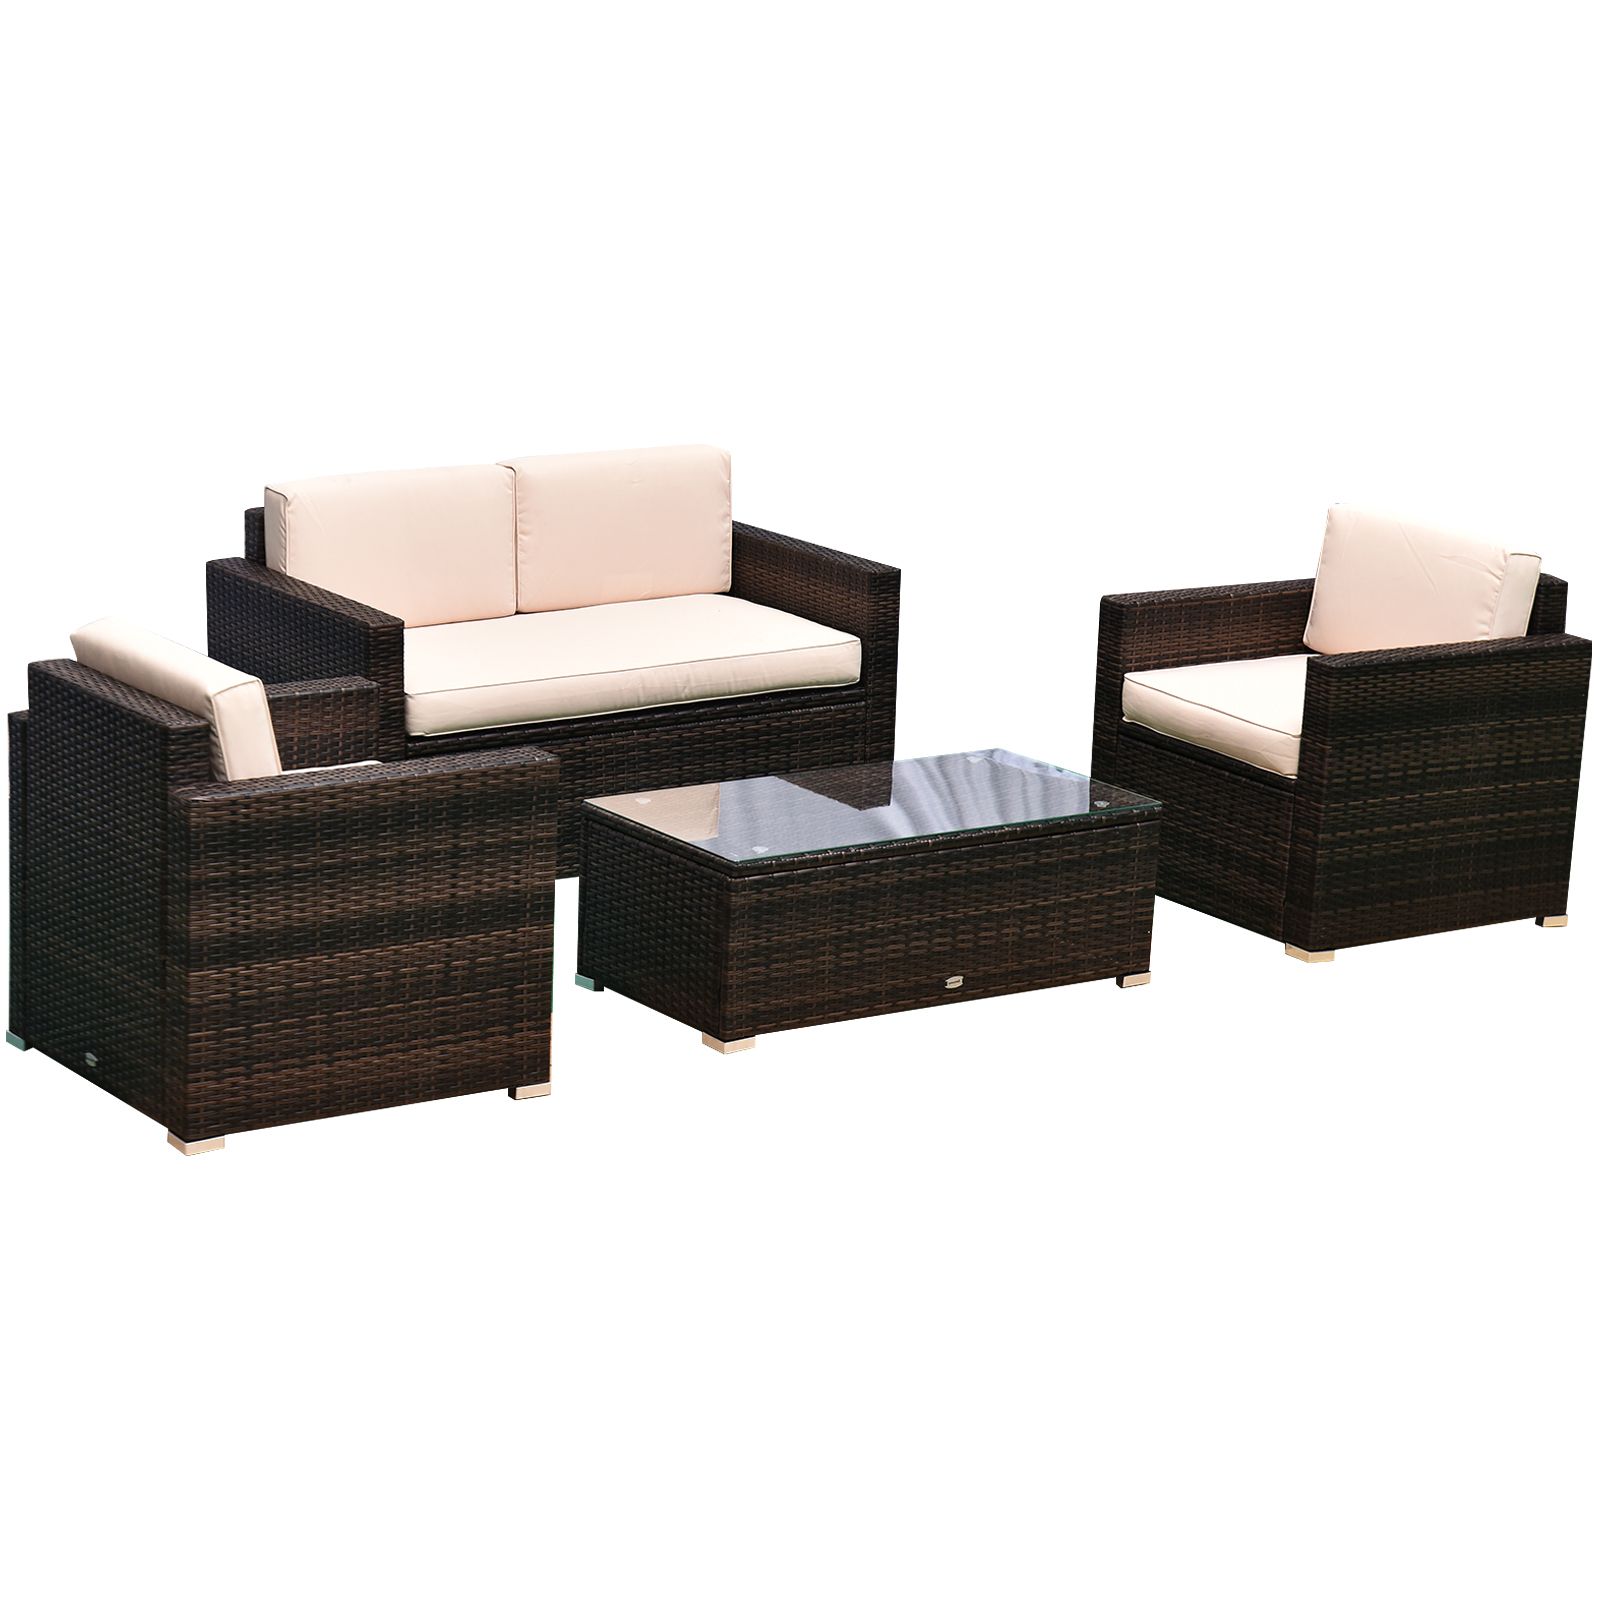 Outsunny 4 Piece Rattan Wicker Furniture Set, Outdoor Cushioned Conversation  Furniture With 2 Chairs, Loveseat, And Glass Coffee Table, Beige (Photo 15 of 15)